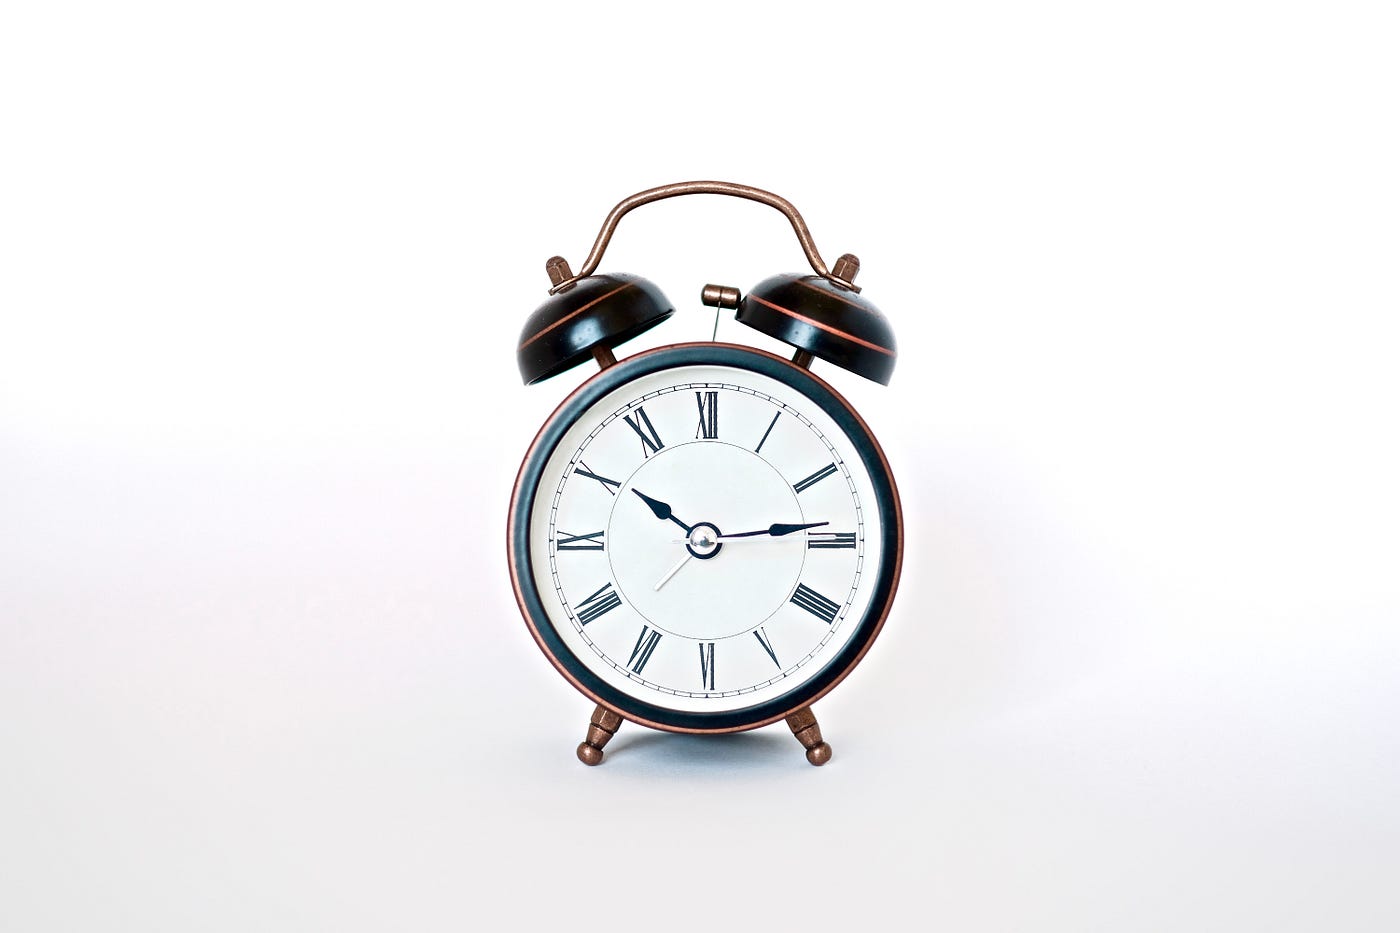 Old style clock, with a white face, black Roman numerals, and two bells atop it. Intermittent fasting does not appear to have an advantage for weight loss, compared with other calorie restriction approaches.